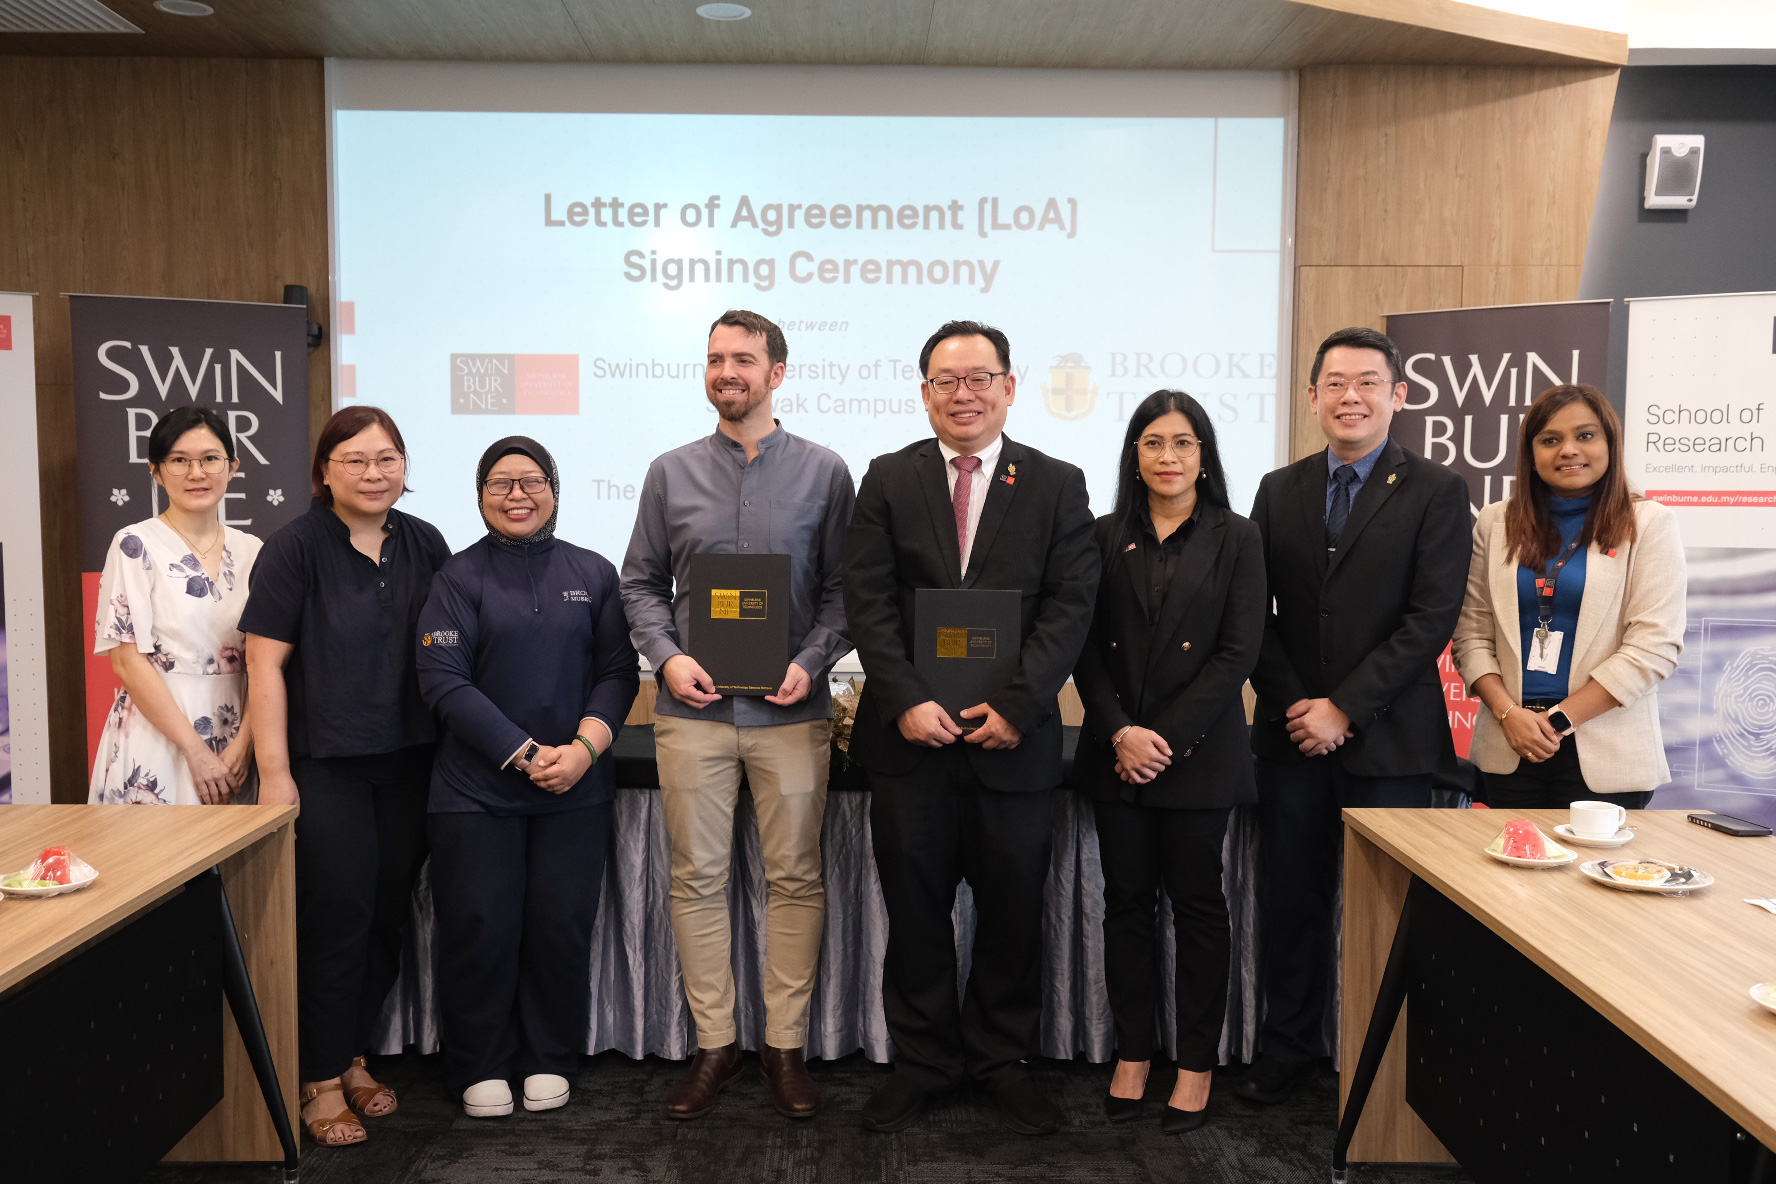 A group photo taken during the LoA signing ceremony, with Ir Professor Lau Hieng Ho (fourth right) and Mr Jason Brooke (fourth left). Also seen are (from third left) Ms Salliza Sideni, Museums Manager of The Brooke Trust and Museums; Professor Dr Ida Fatimawati bt Adi Badiozaman, Swinburne Sarawak Deputy Pro Vice-Chancellor (Research); Ir Professor Sim Kwan Yong, Swinburne Sarawak Deputy Pro Vice-Chancellor (Academic) and others.